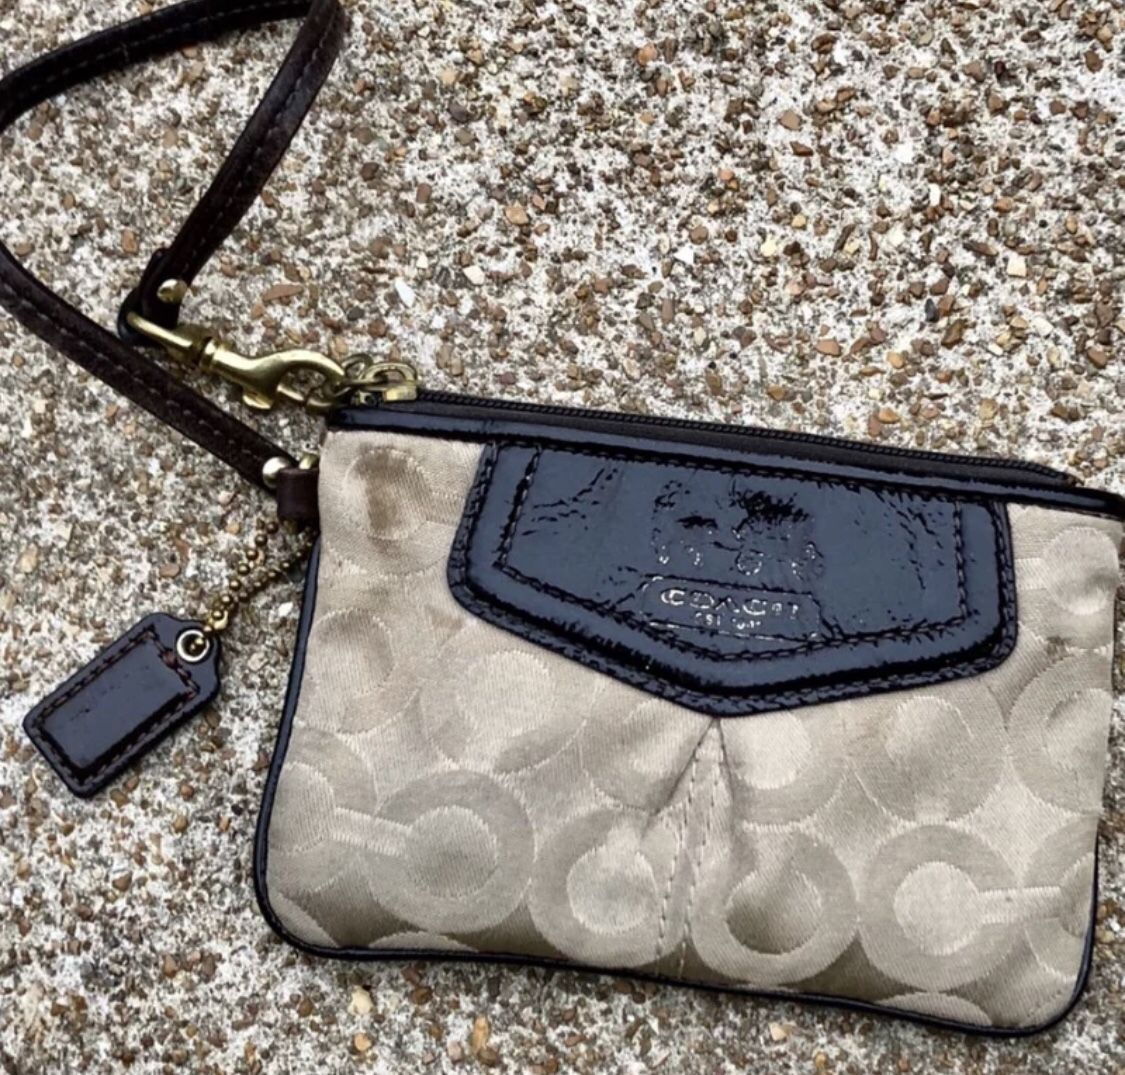 Authentic Coach Small Wristlet